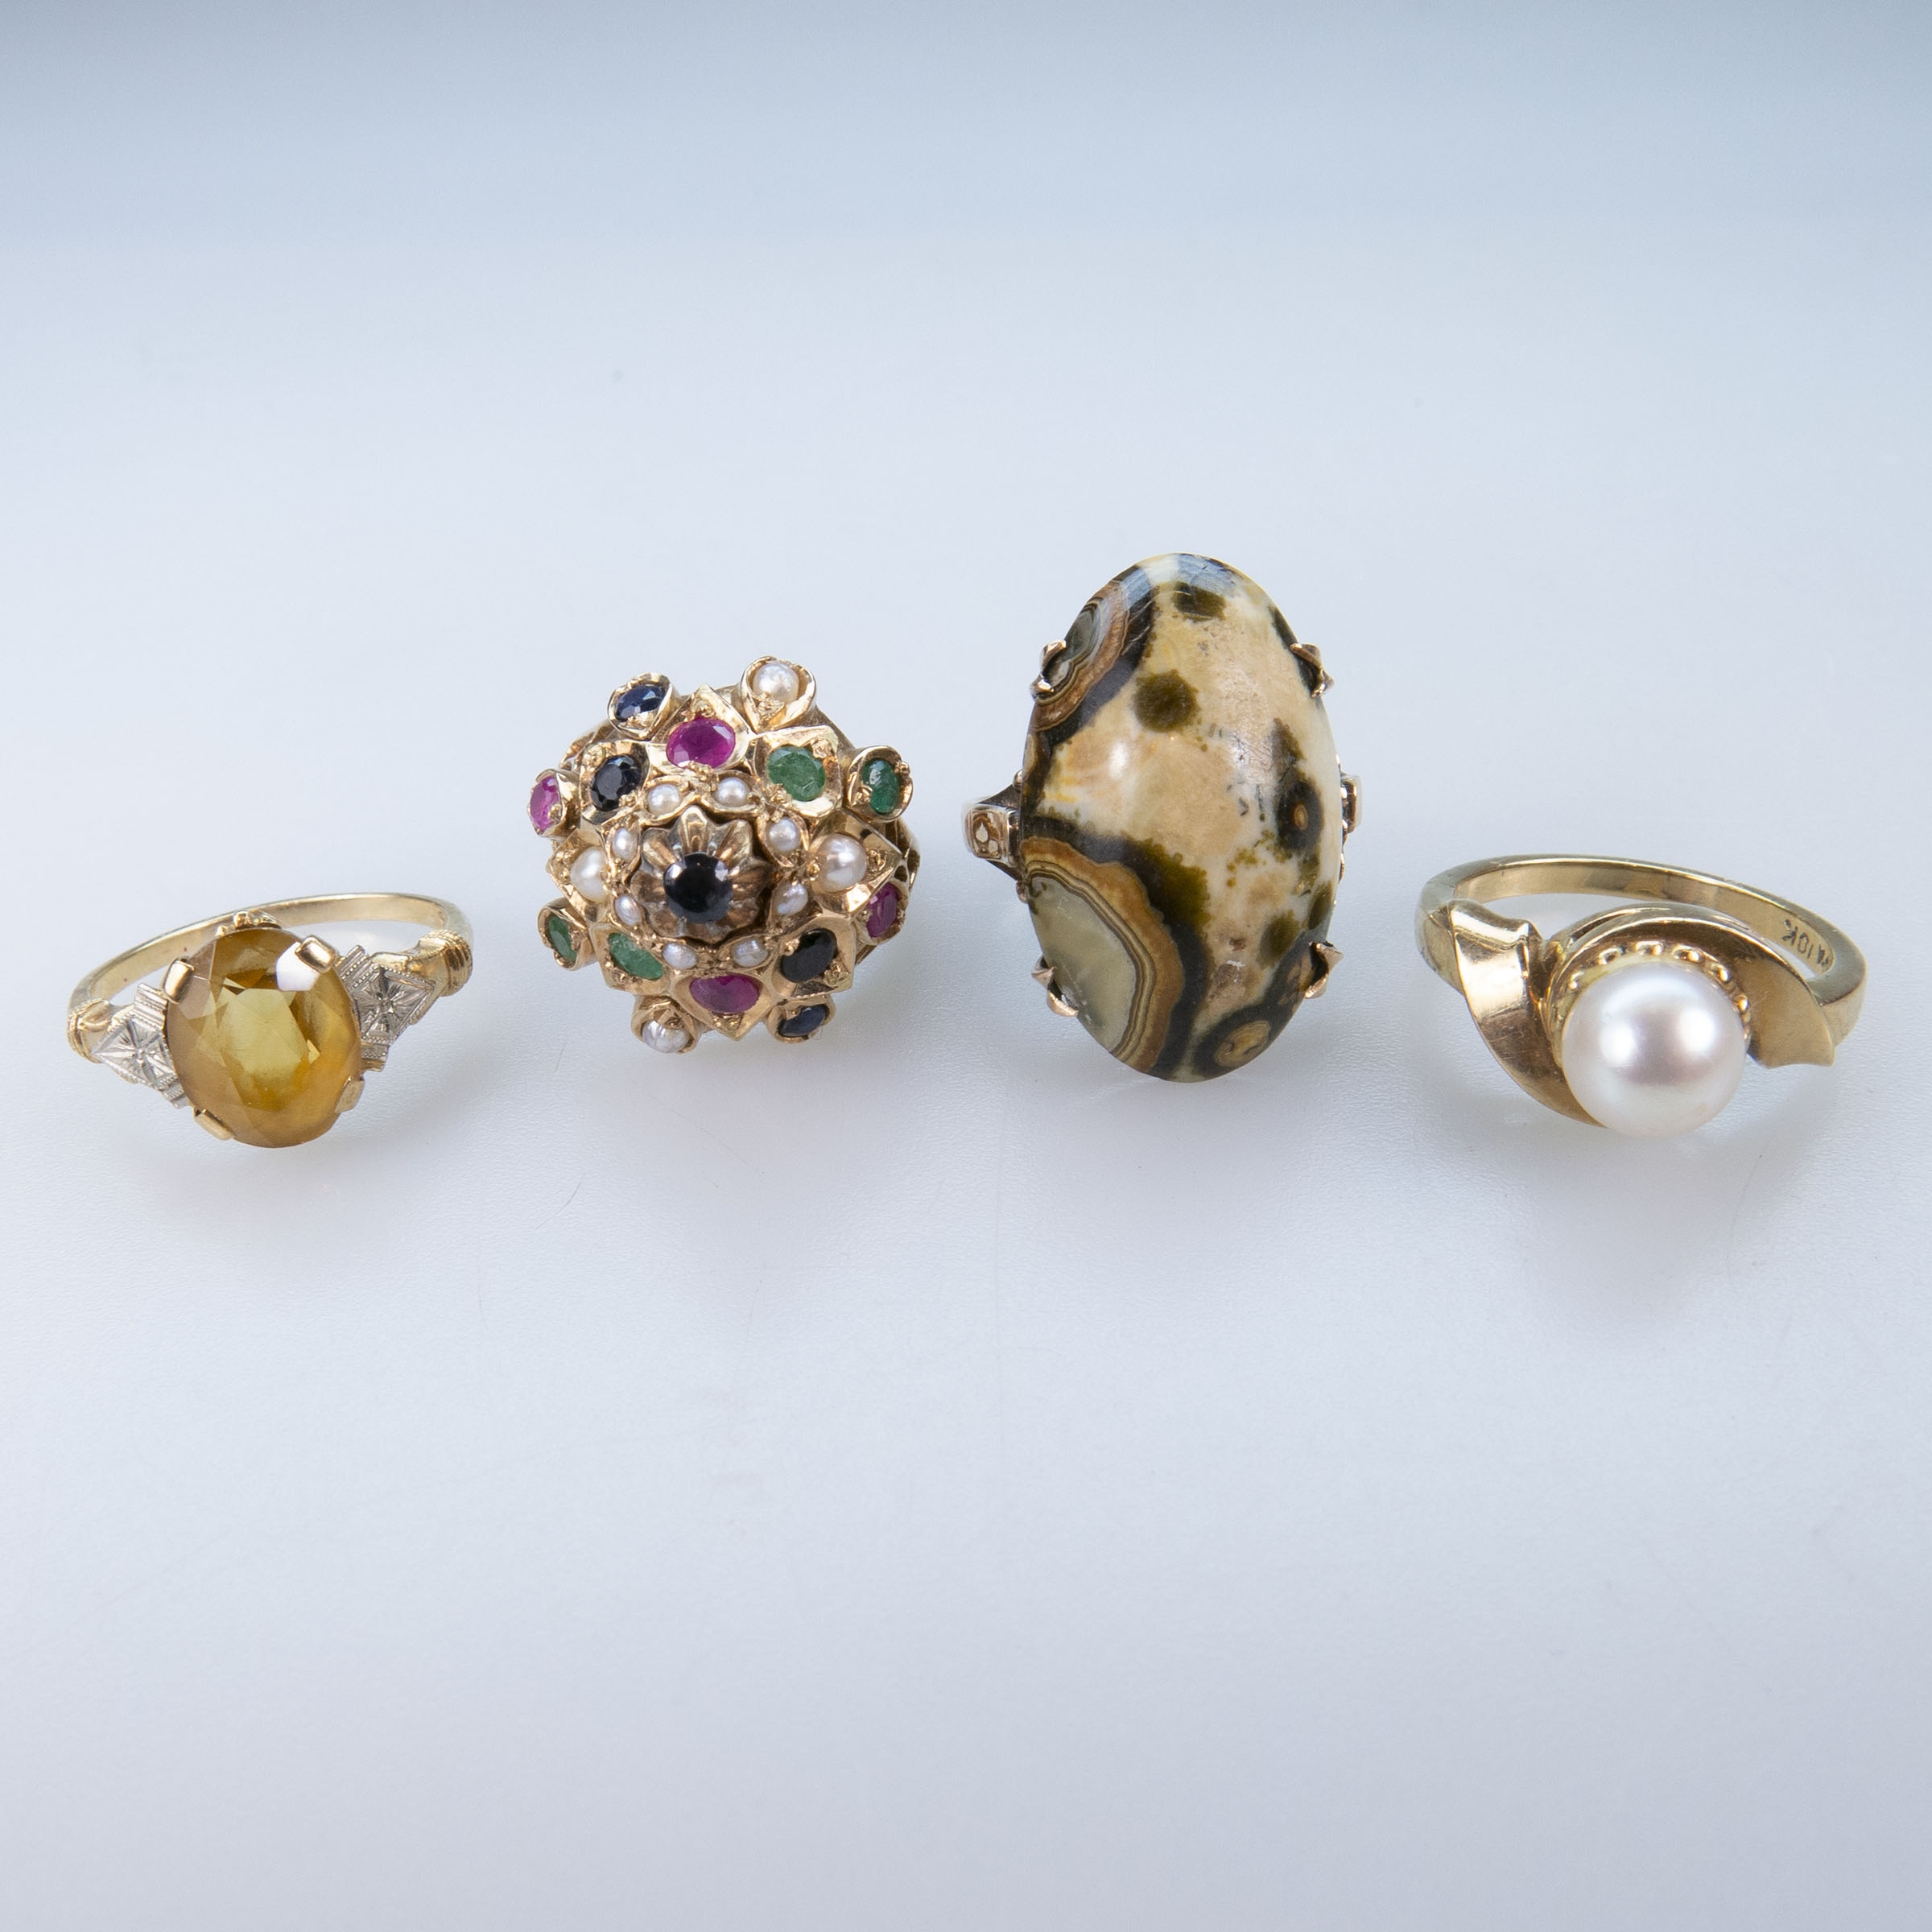 1 x 18k, 1 x 14k, And 2 x 10k Yellow Gold Rings